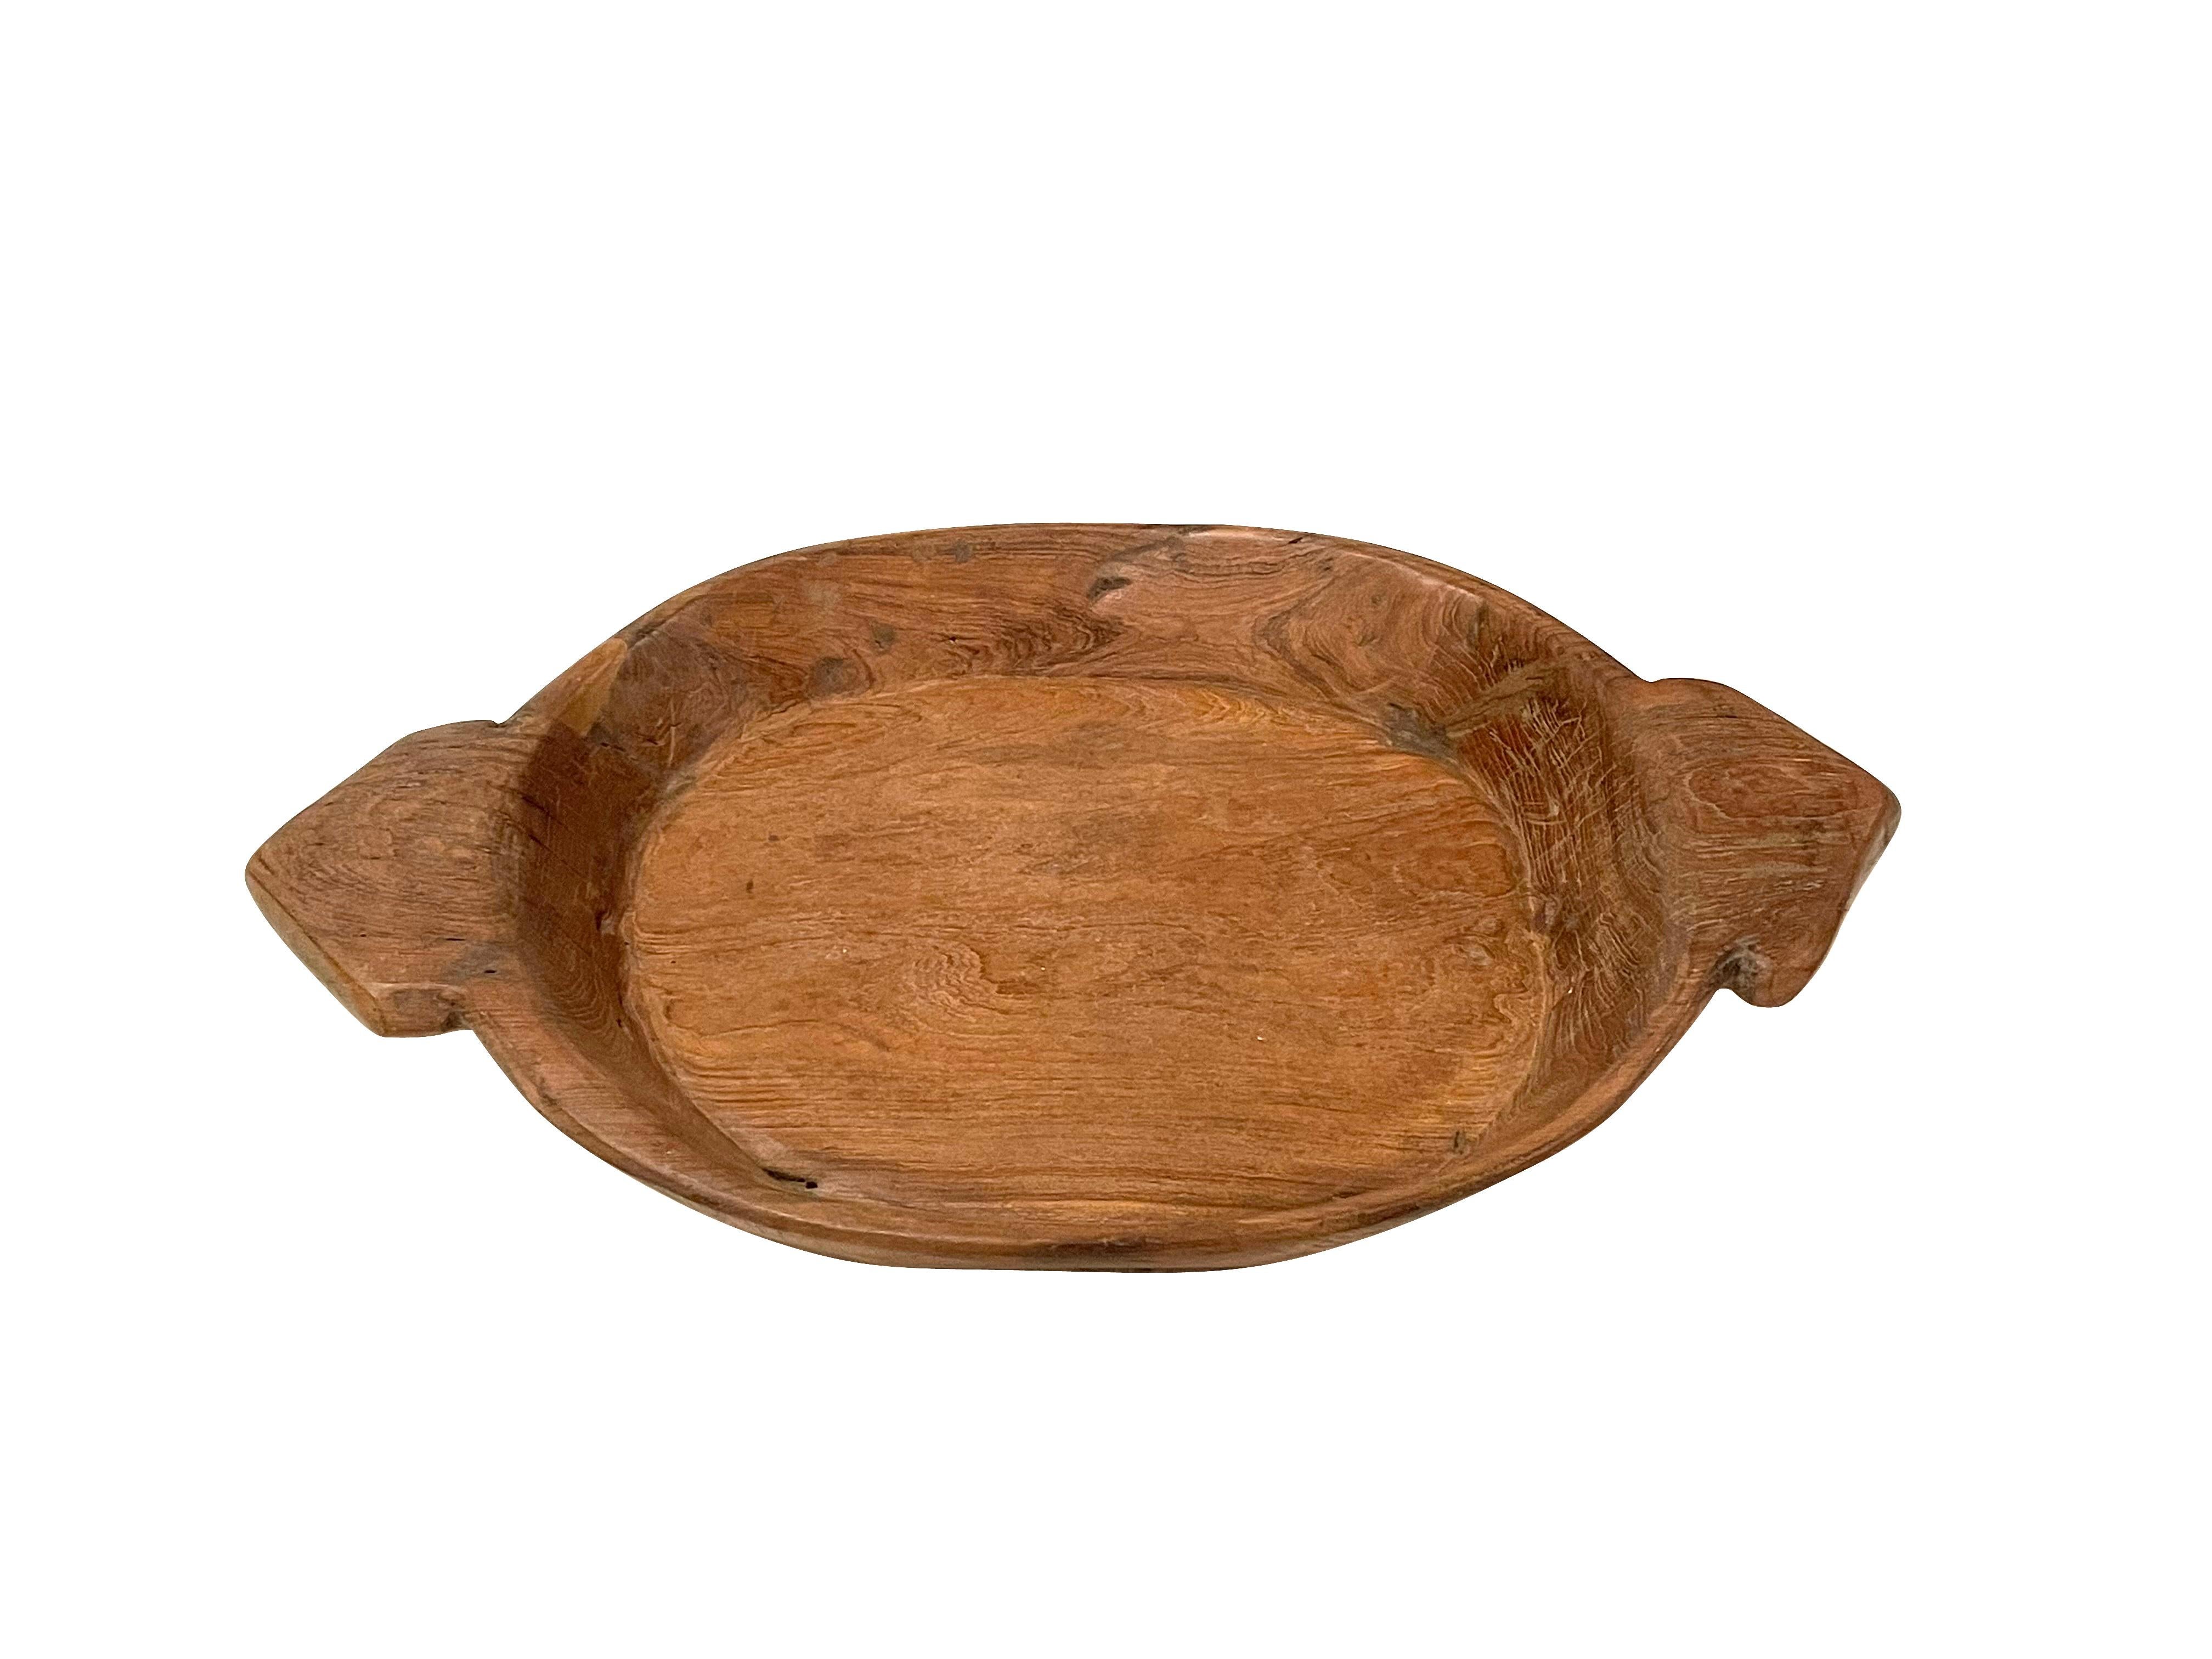 19th century Indian wooden bowl used to serve food.
Beautiful natural patina.
Hand carved.